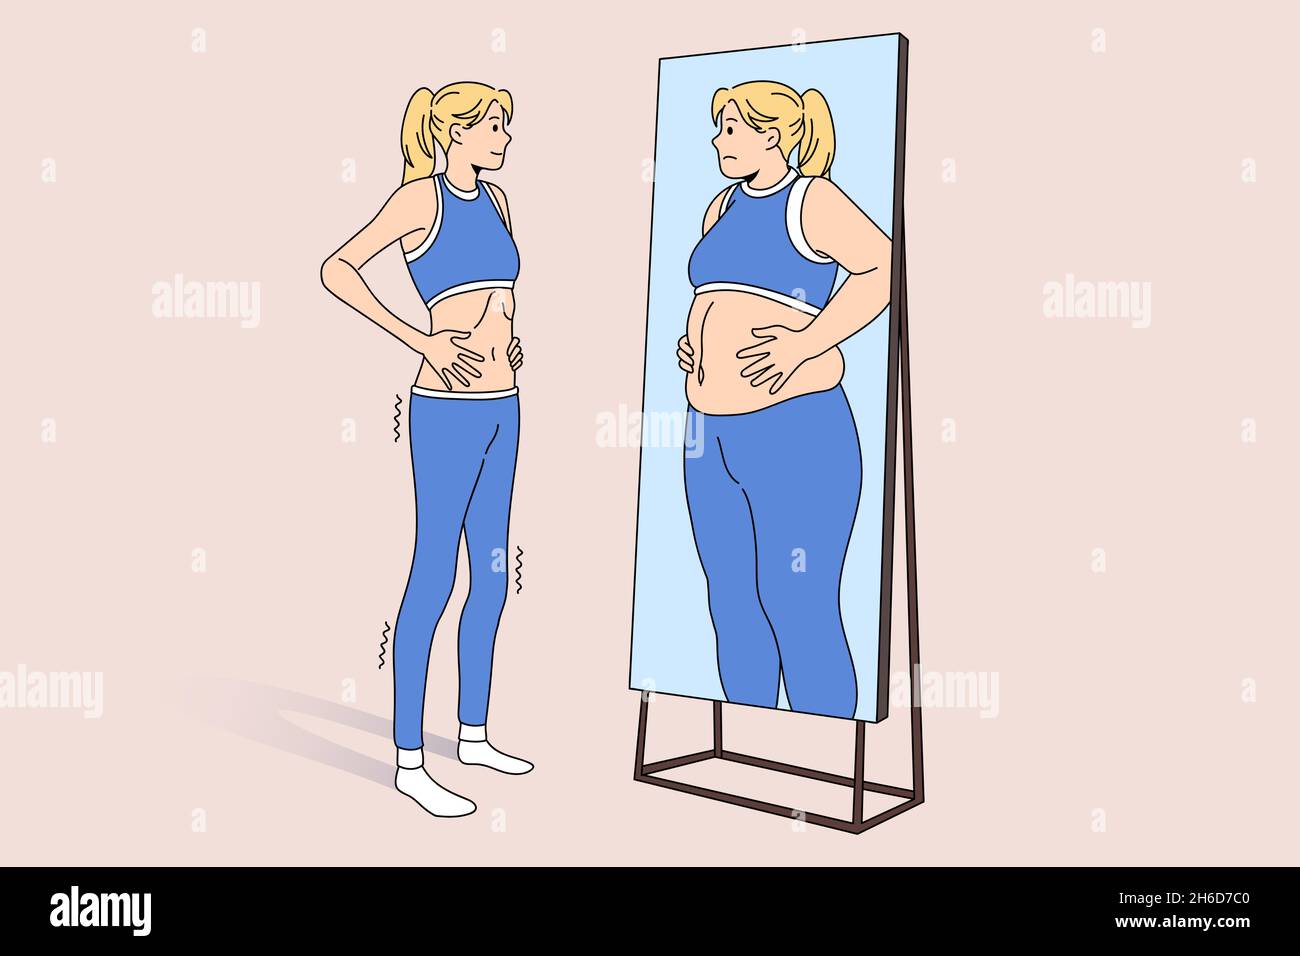 Unwell skinny girl look in mirror see fat obese reflection. Upset thin slim woman suffer from eating disorder. Female struggle with anorexia or bulimia. Mental health problem. Vector illustration. Stock Vector